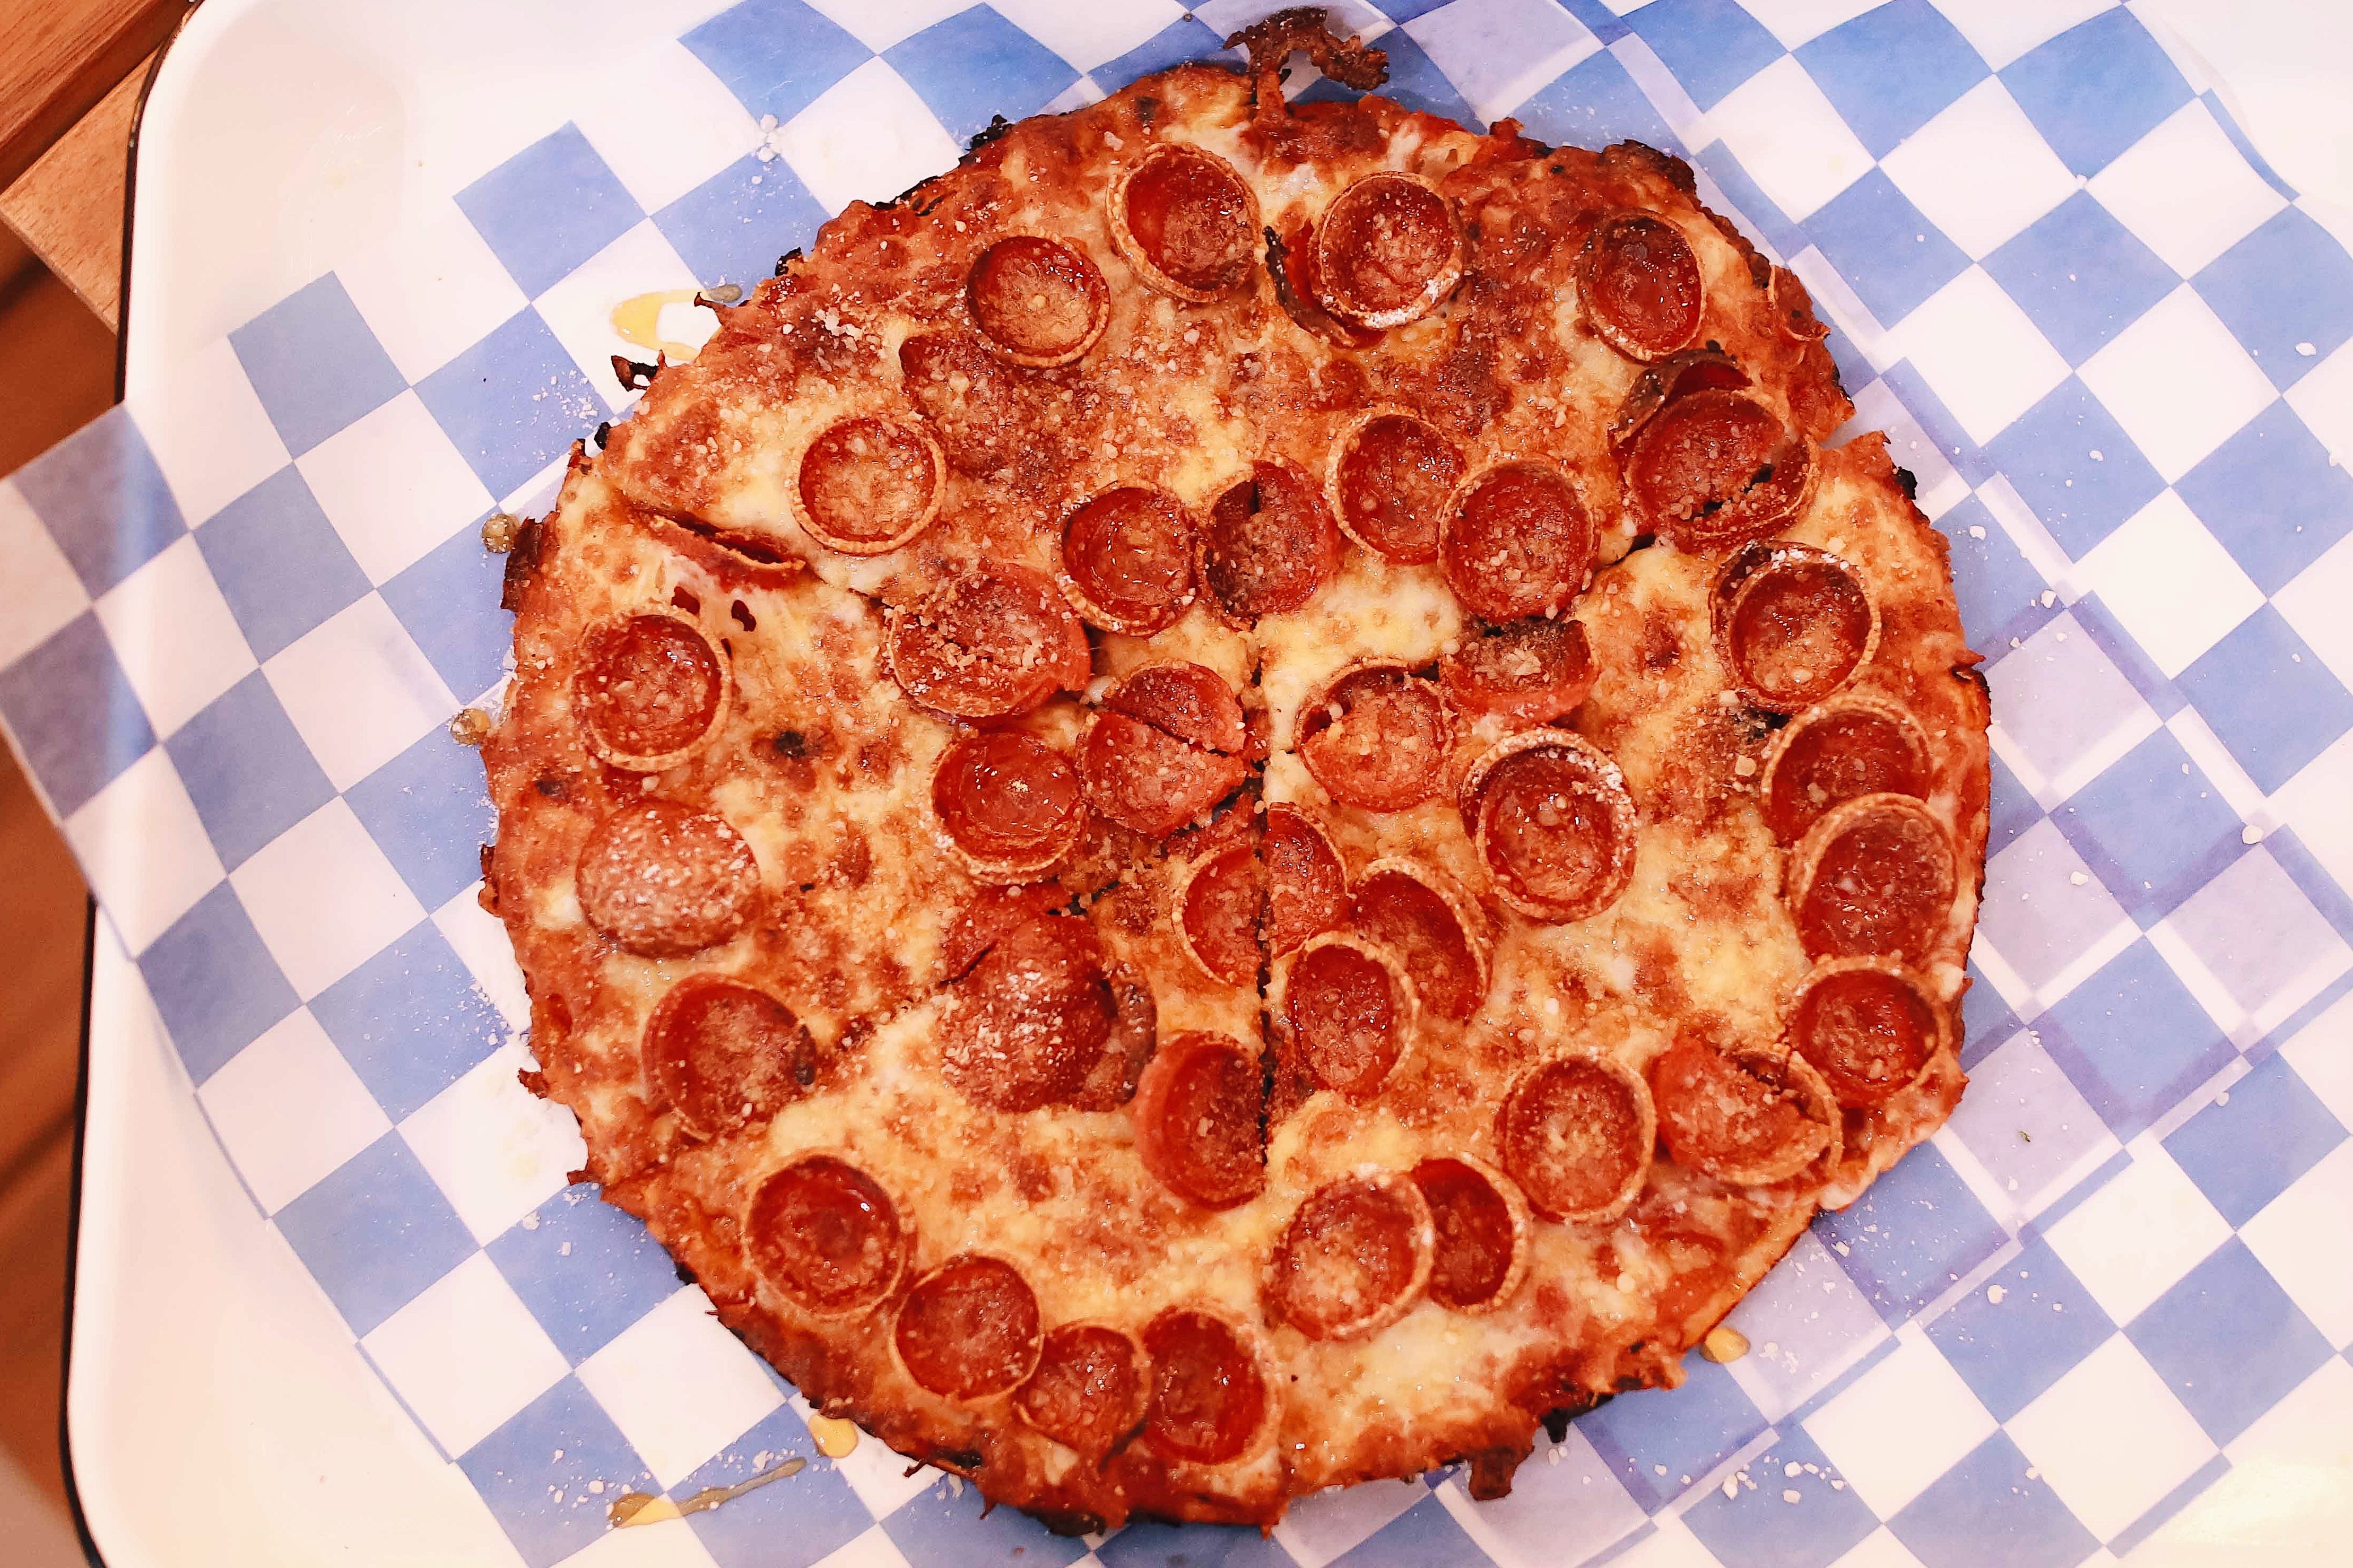 21 reasons why South Shore bar pizza is America's most delicious